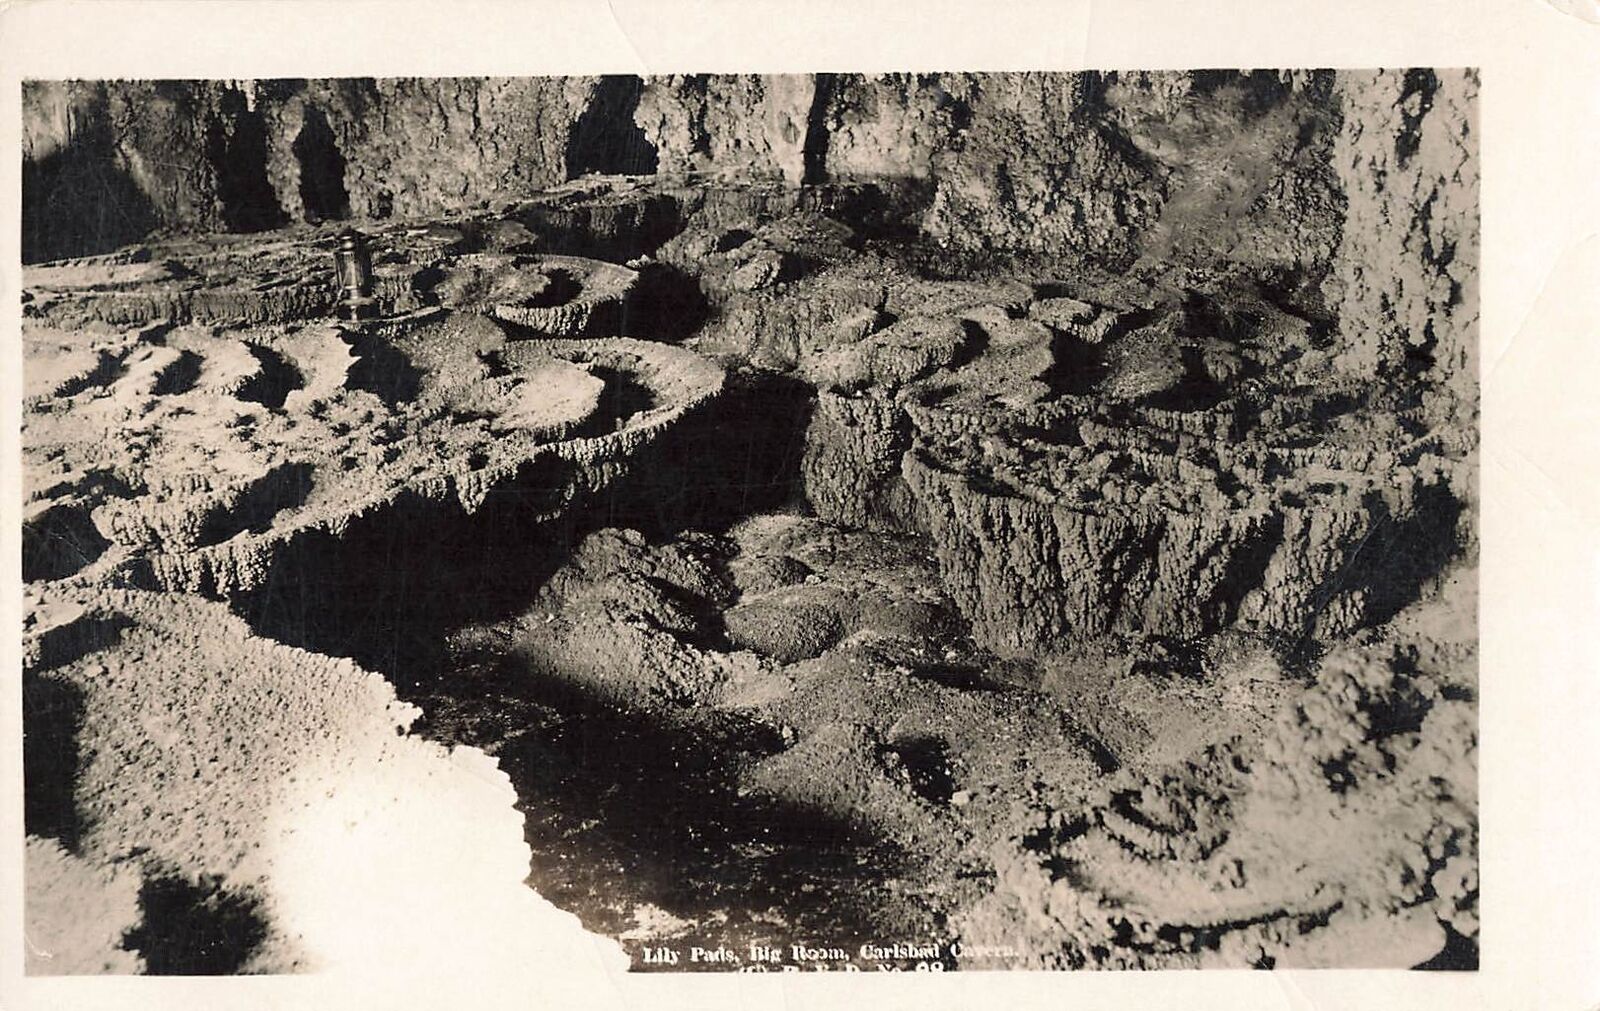 RPPC Carlsbad Cave National Monument, Lily Pads, Carlsbad New Mexico